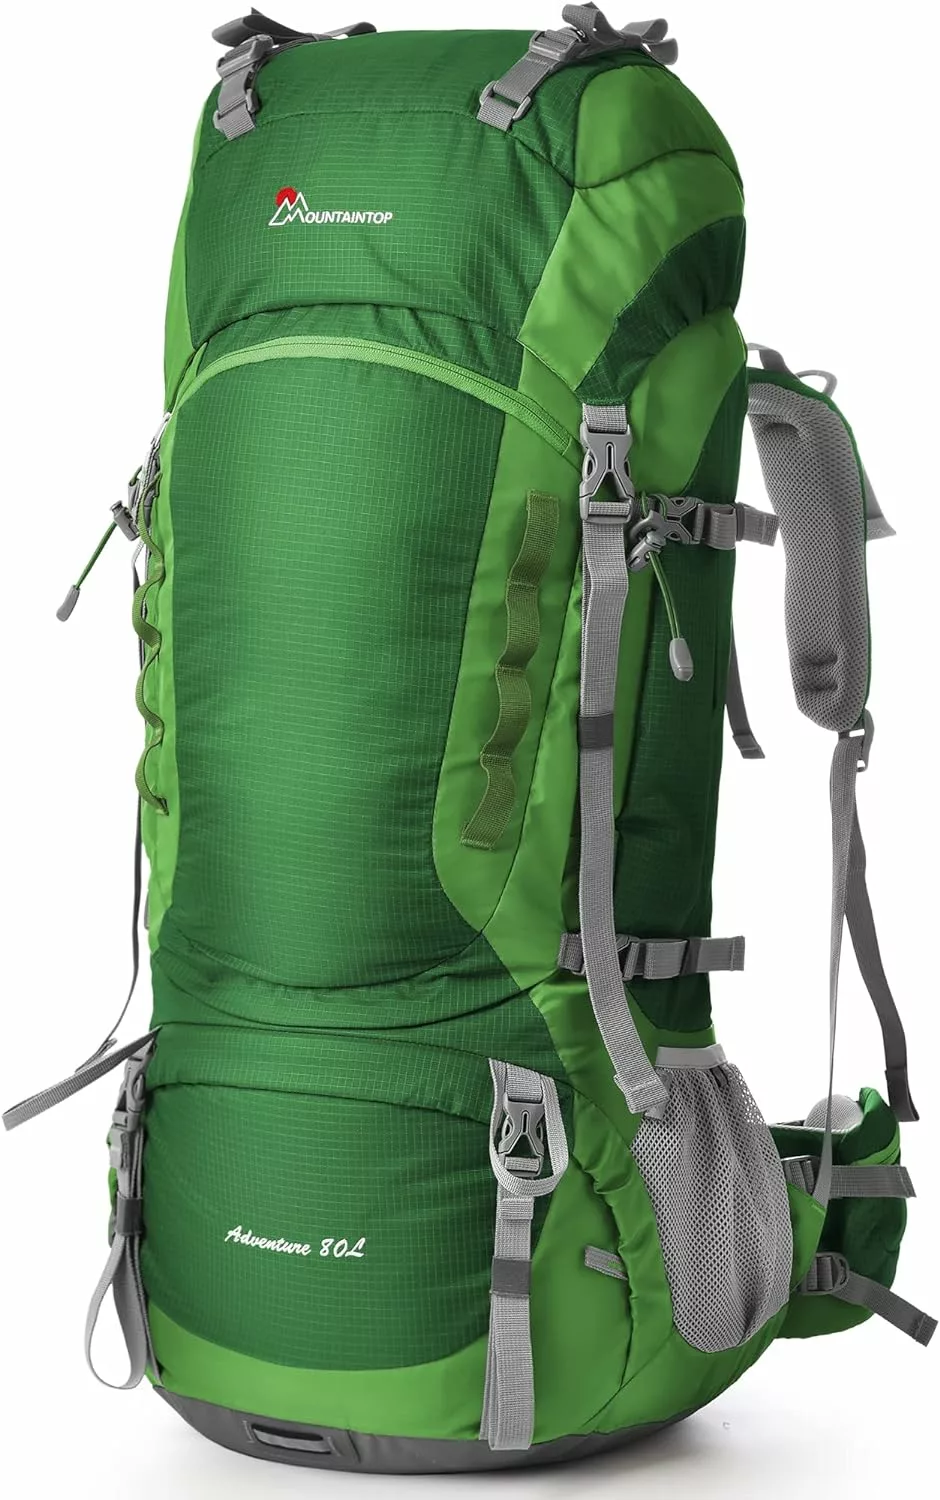 MOUNTAINTOP Hiking Backpack 80L